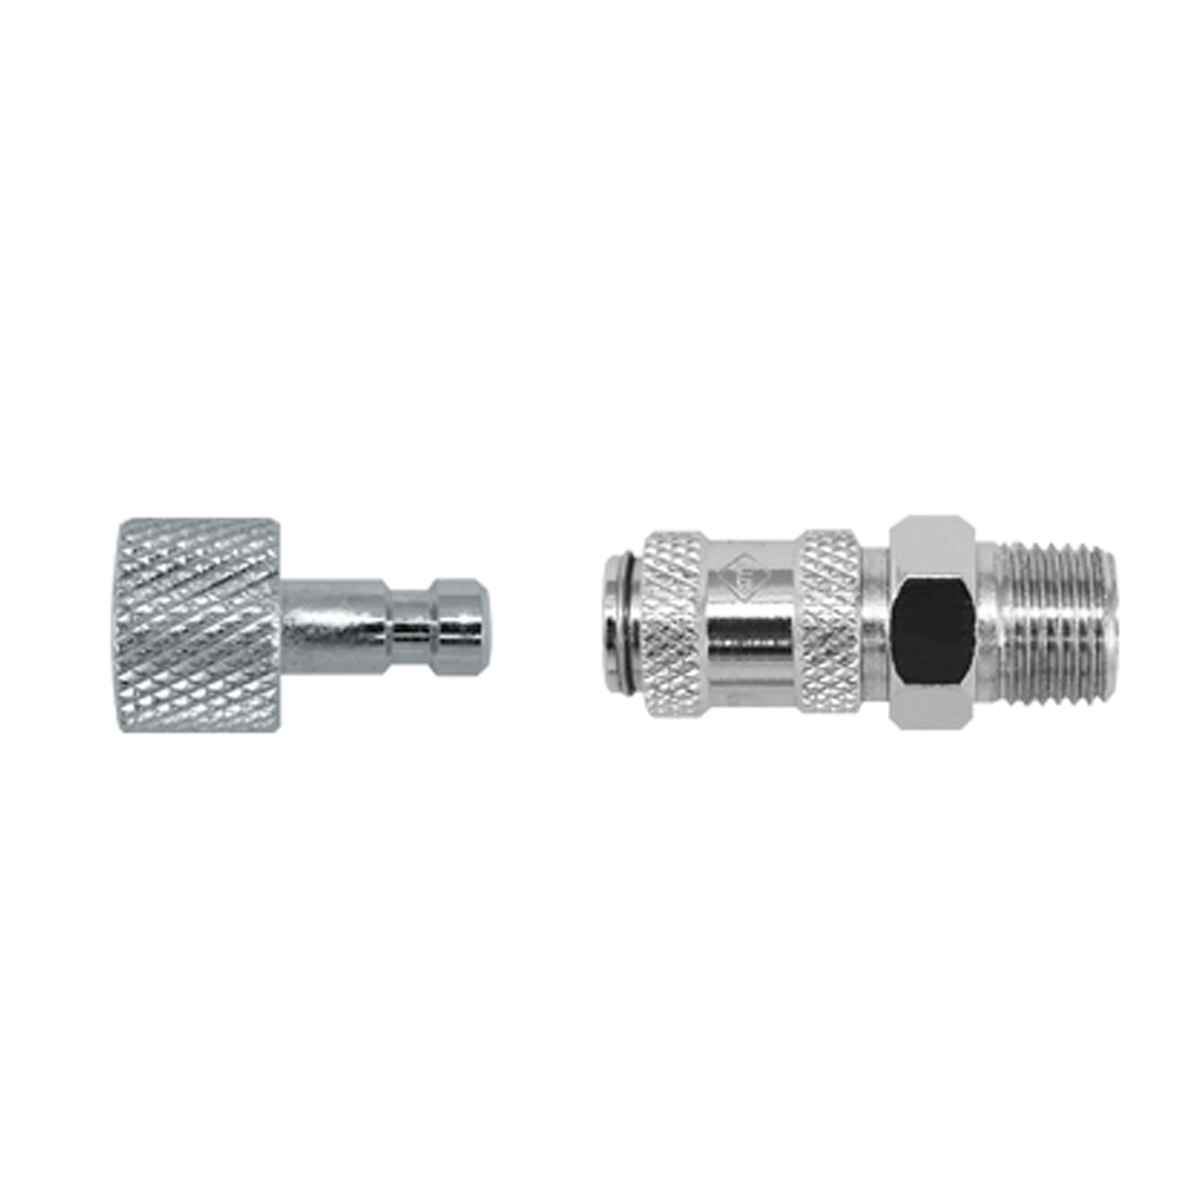 Sparmax Quick Connect Fittings